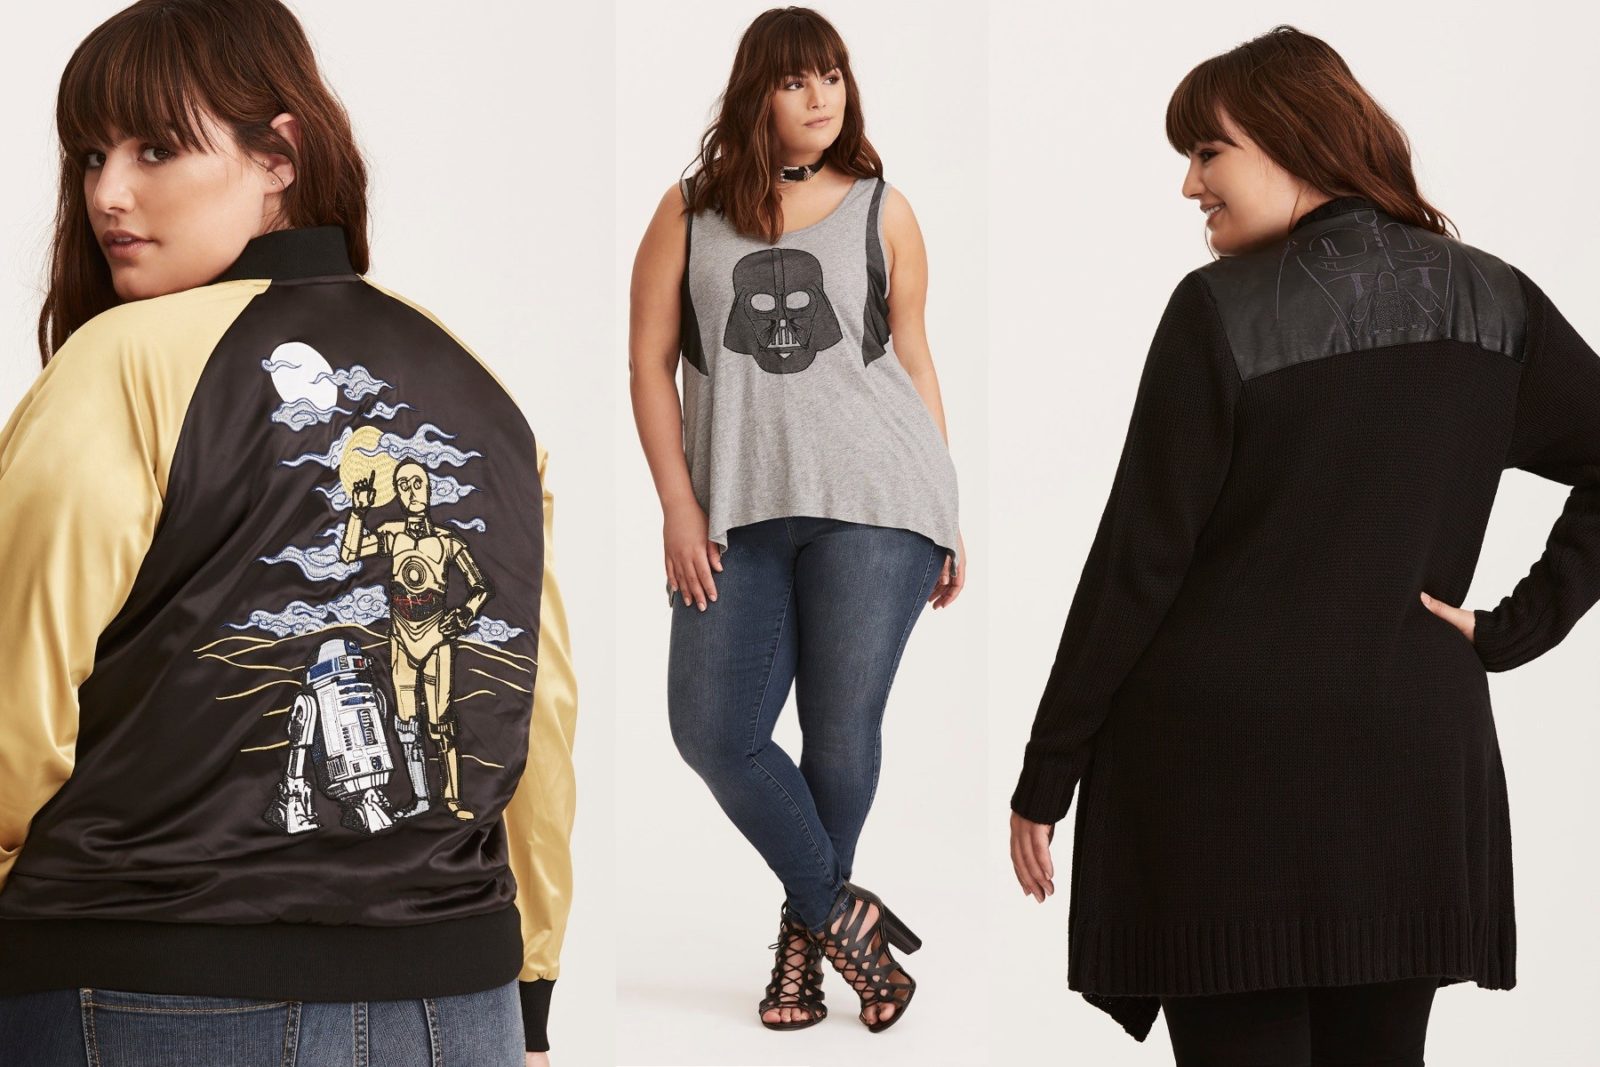 New Her Universe Fashion at Torrid